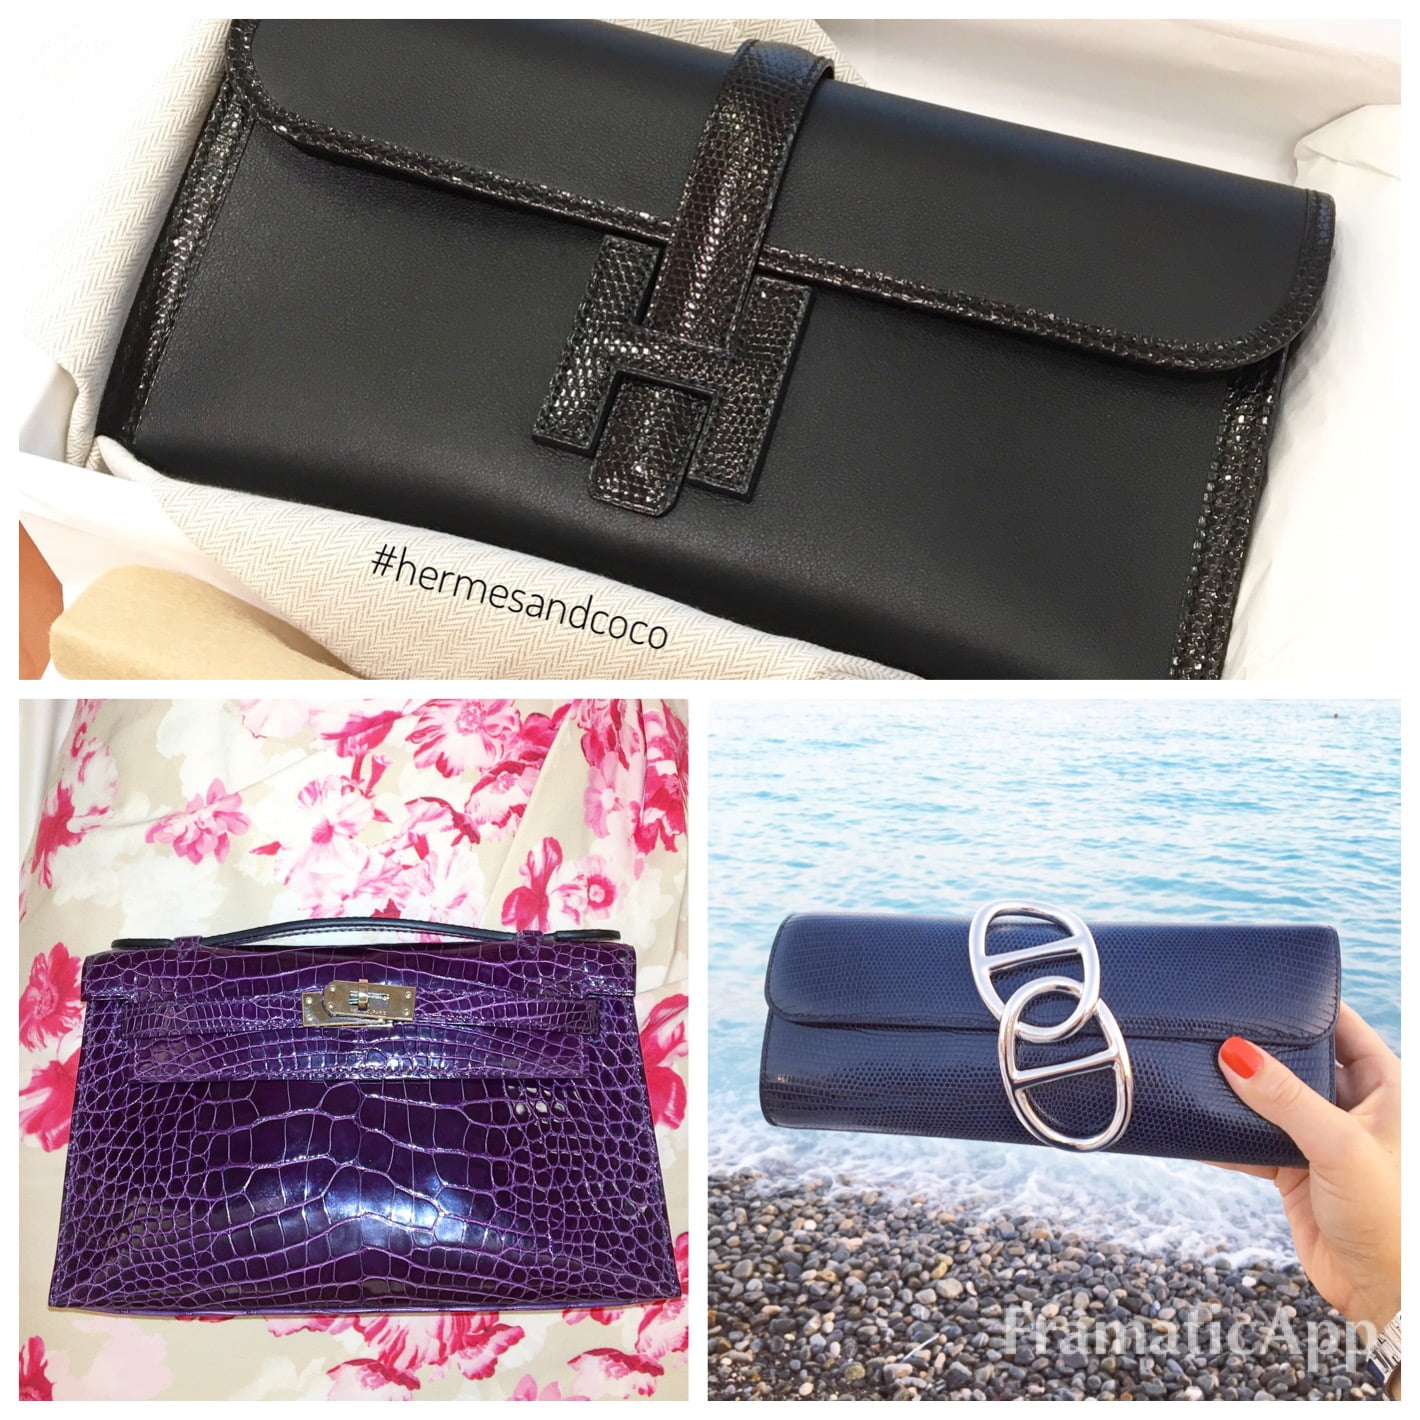 The Best Replica Hermes Egee Clutch Discount Price Is Waiting For You